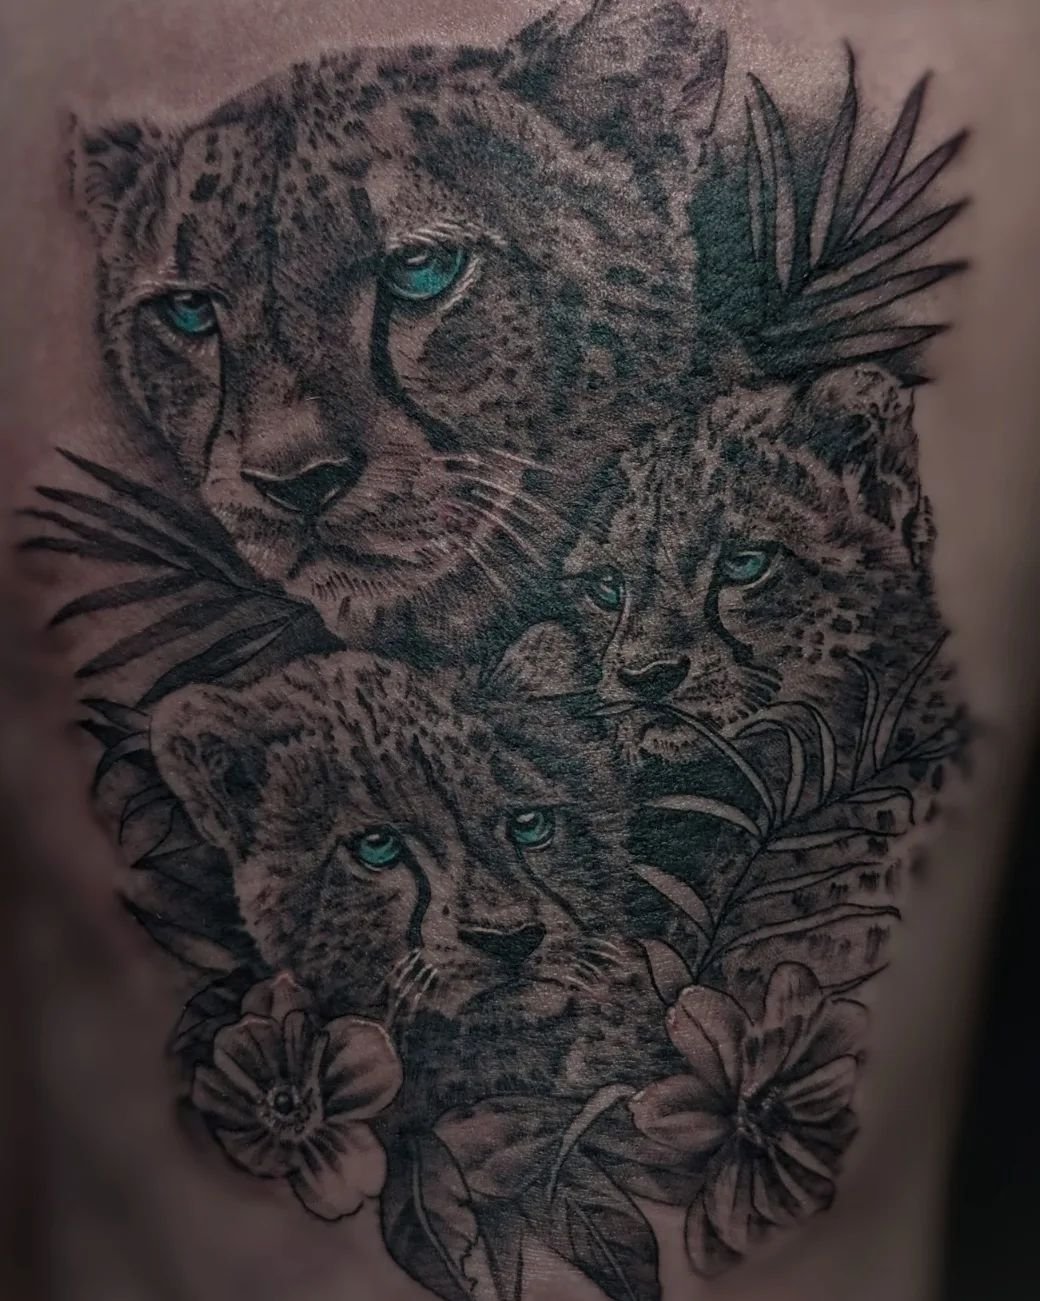 Thigh from today. Momma and cubs
@pepax.official @radiantcolorsink @allegoryink @ttechofficial @masttattoo.official @dragonhawkofficial @biotat_ @tattooproton @mapletattoosupply @eikondevice @rotaryworks